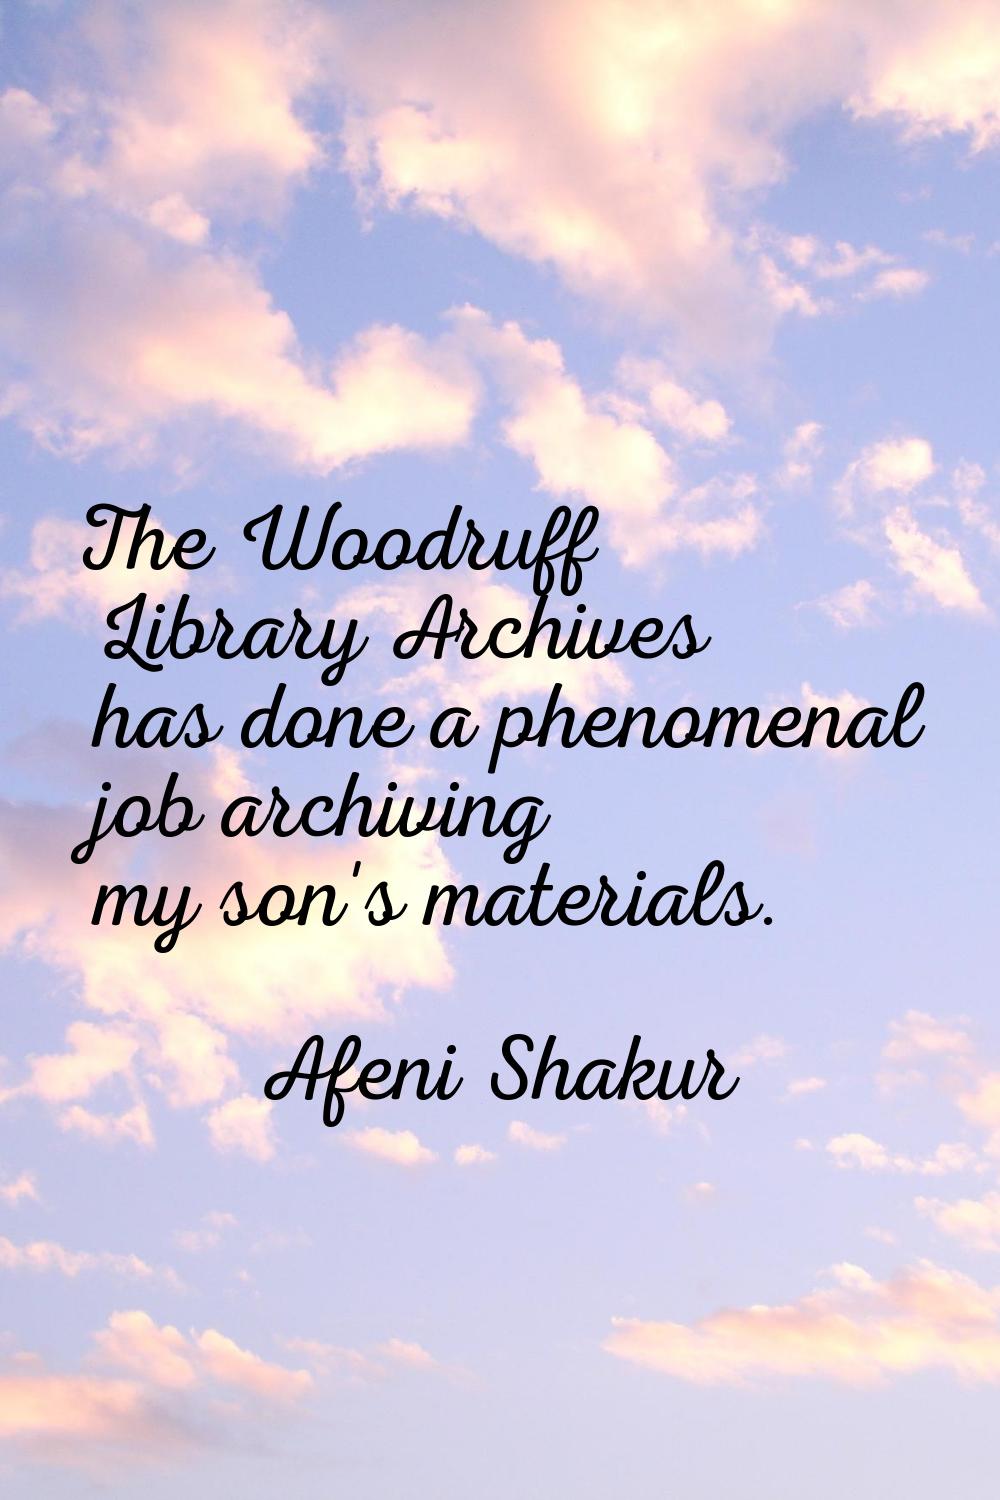 The Woodruff Library Archives has done a phenomenal job archiving my son's materials.